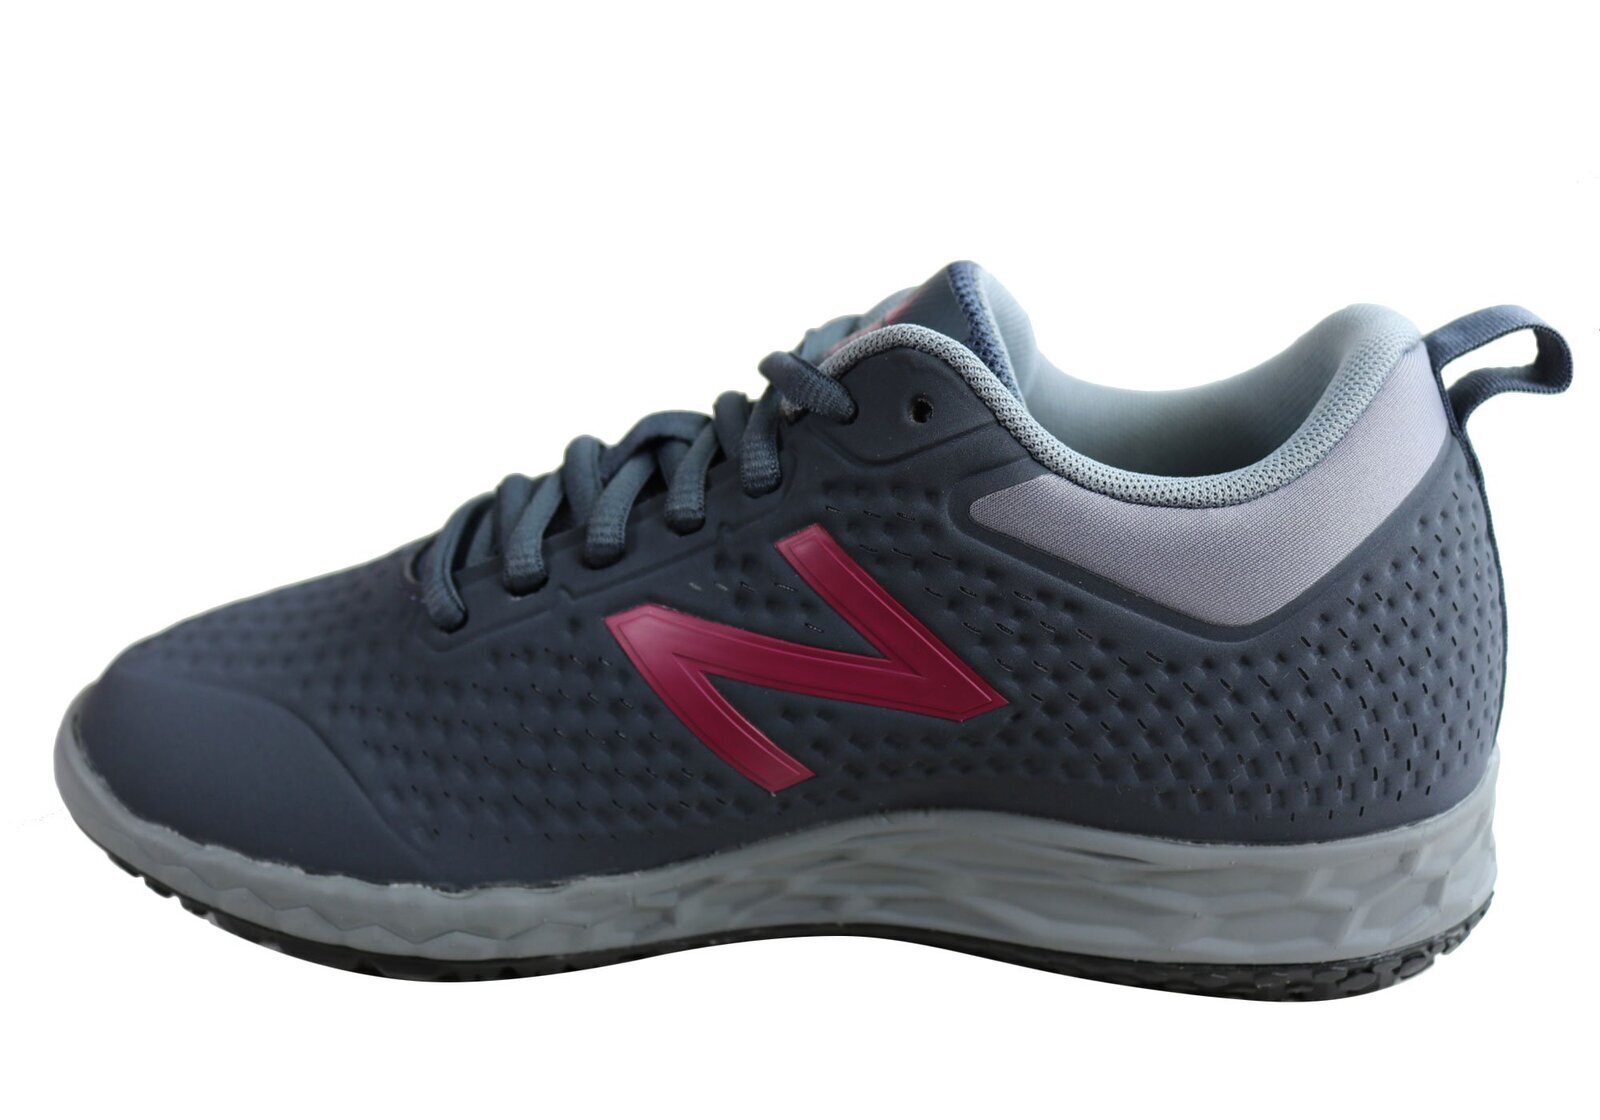 New Balance Womens 806 Wide Fit Slip Resistant Work Shoes - Grey/Berry - US 6